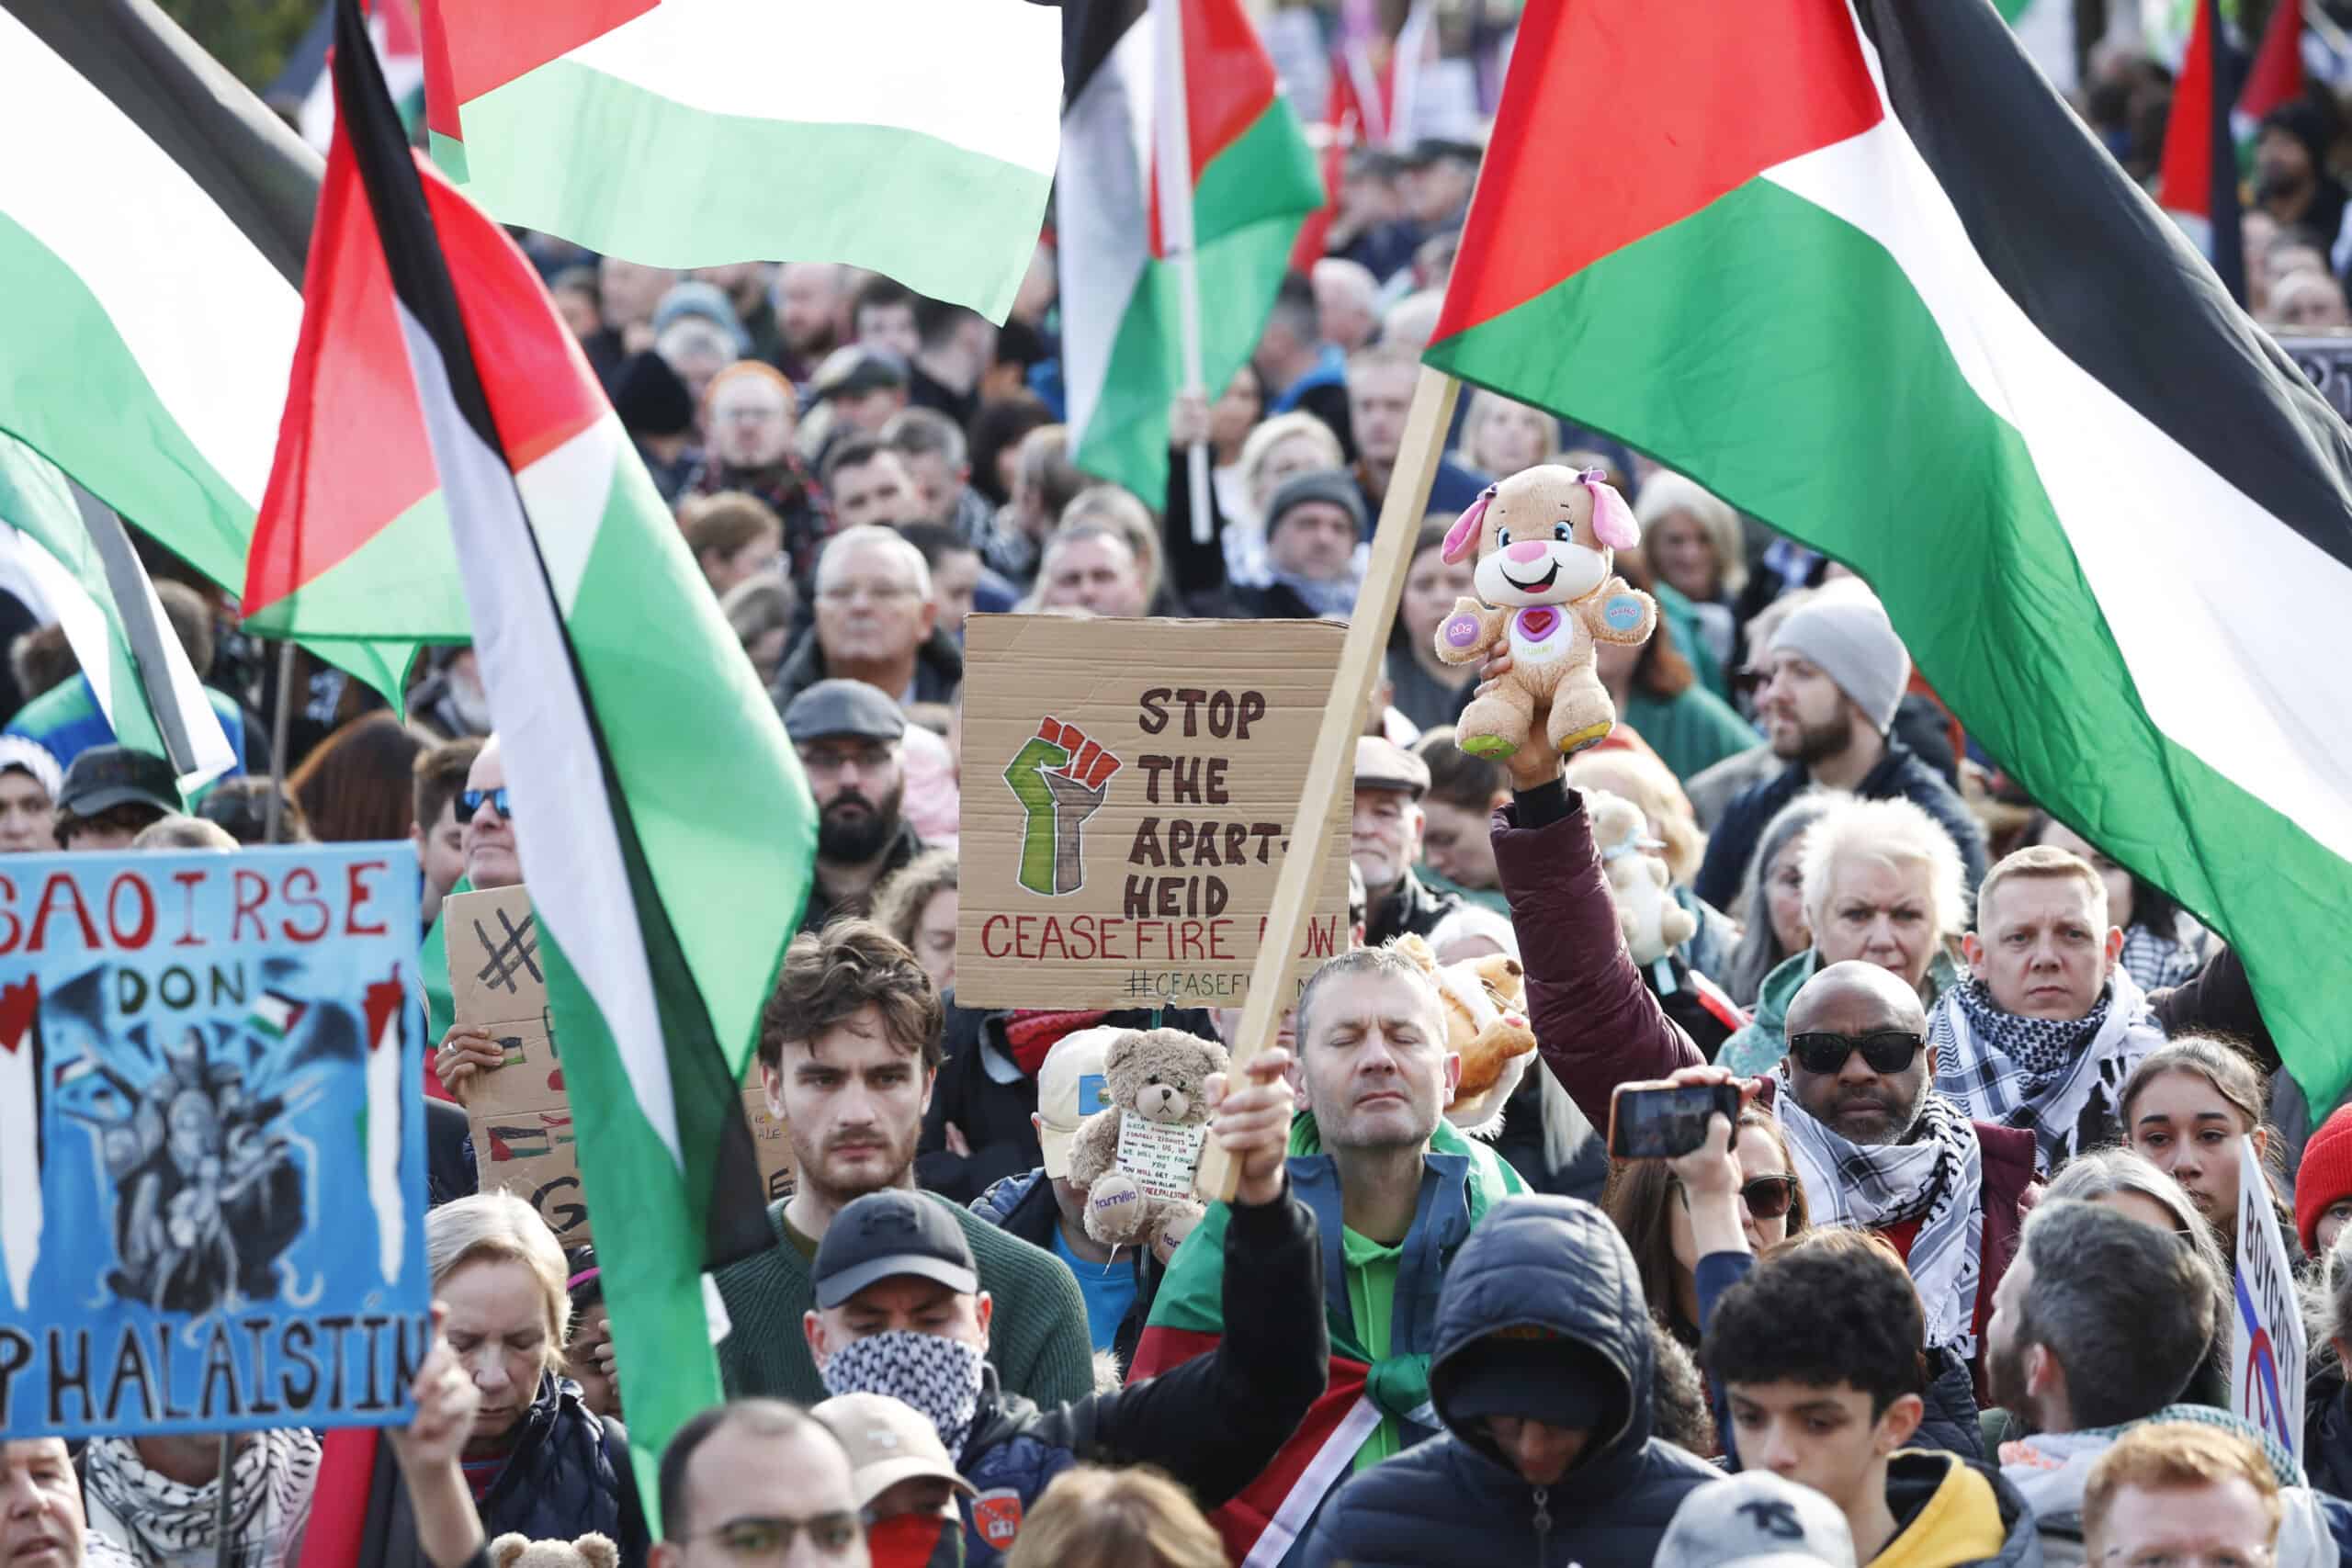 Mystery surrounds sudden cancellation of regional bus to pro-Palestine march in London